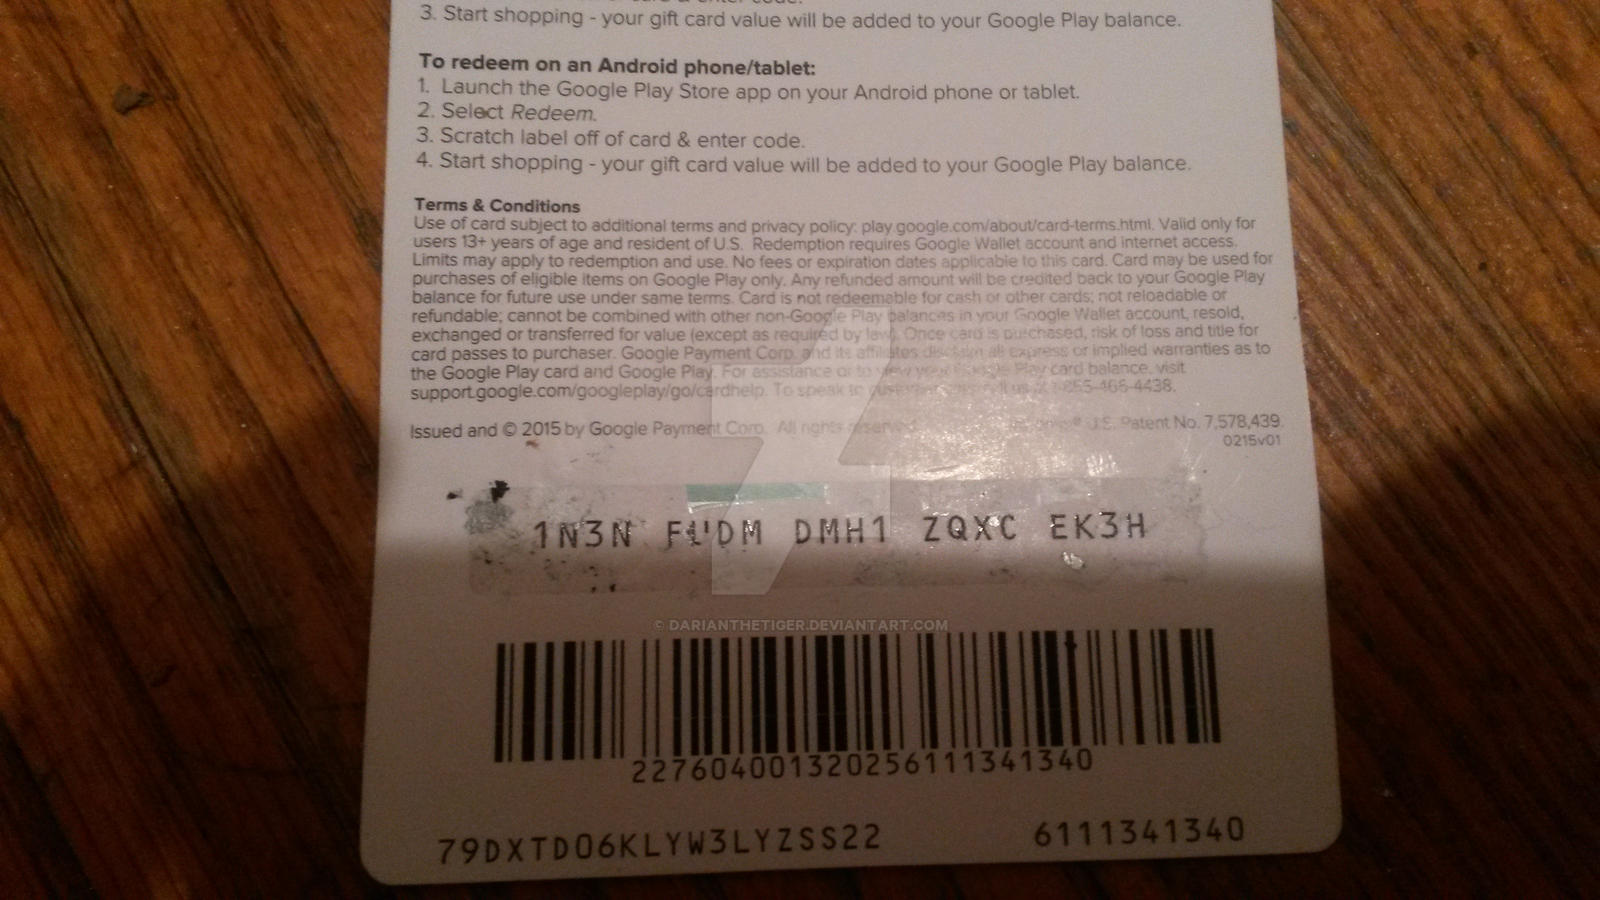 25 Google Play Gift Card Code Giveaway By Darianthetiger On Deviantart